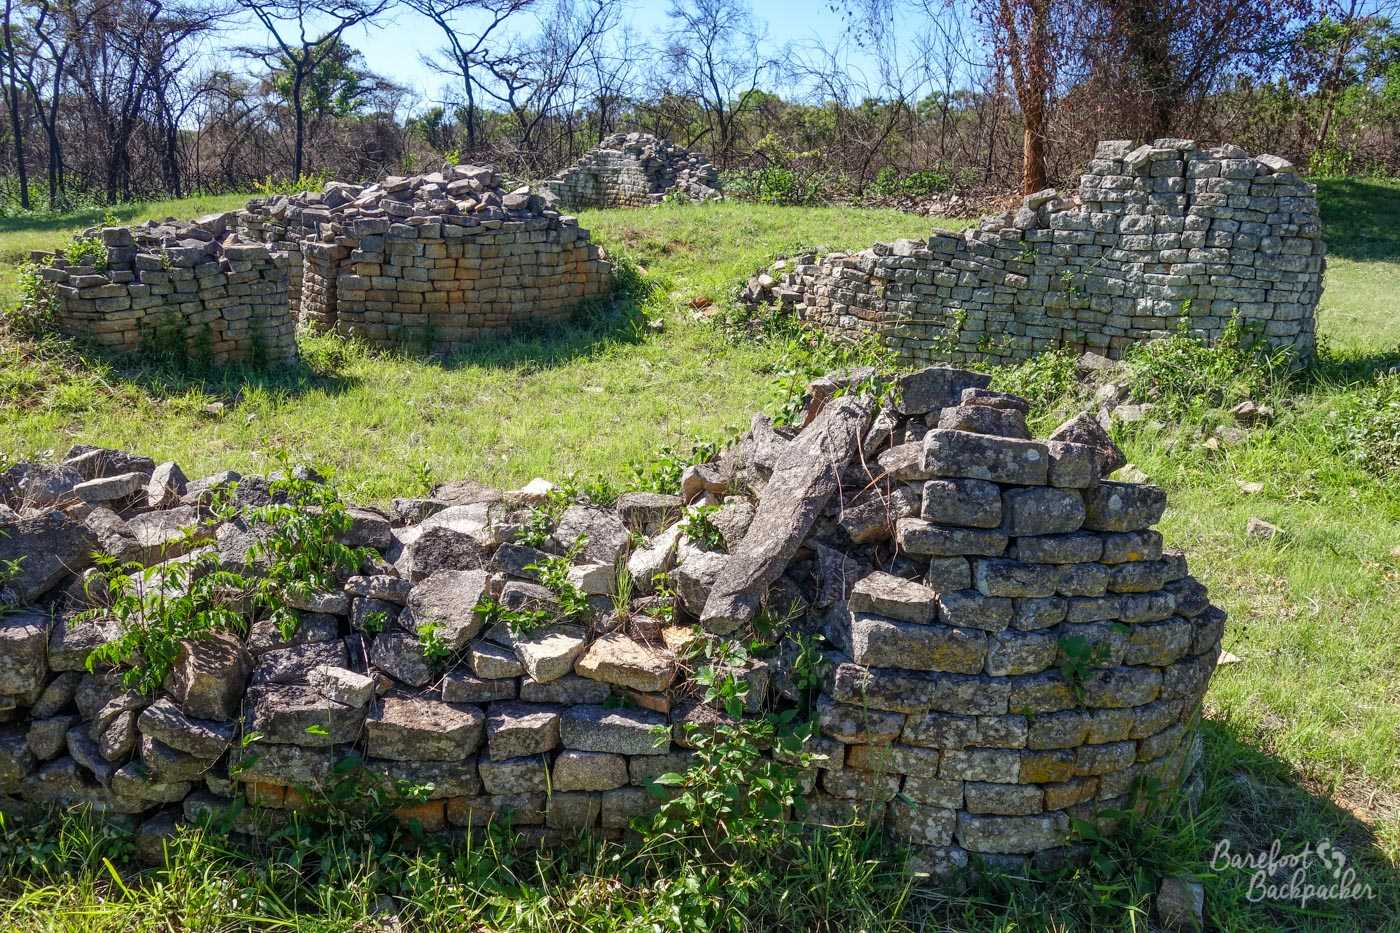 Stone ruins, probably housing, in the Valley complex at Great Zimbabwe.